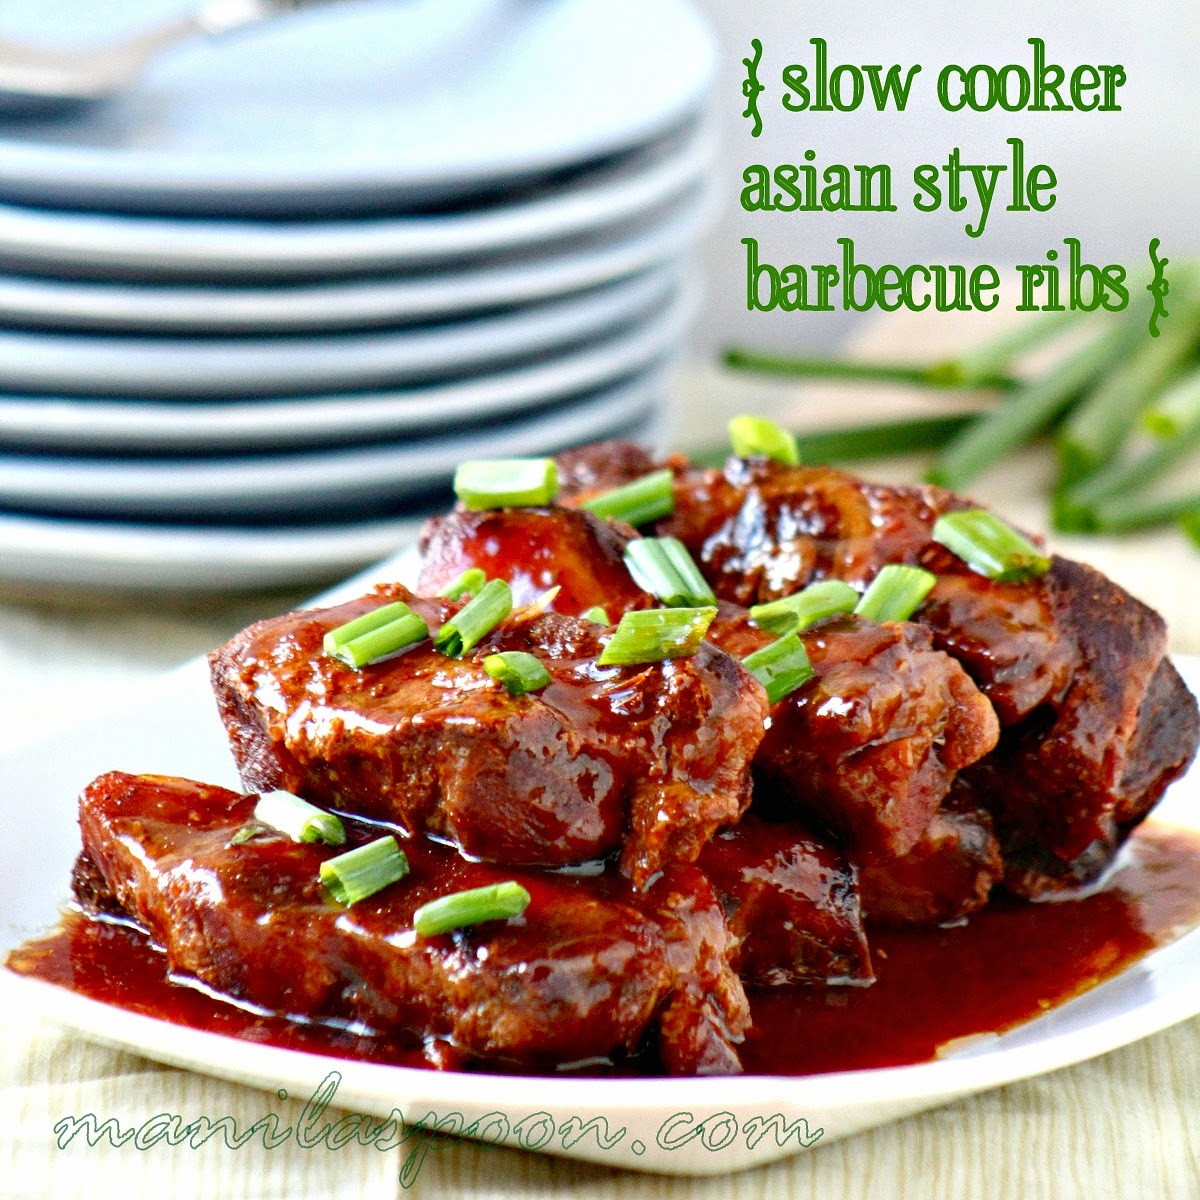 Slow Cook Pork Ribs
 Slow Cooker Asian Barbecue Ribs